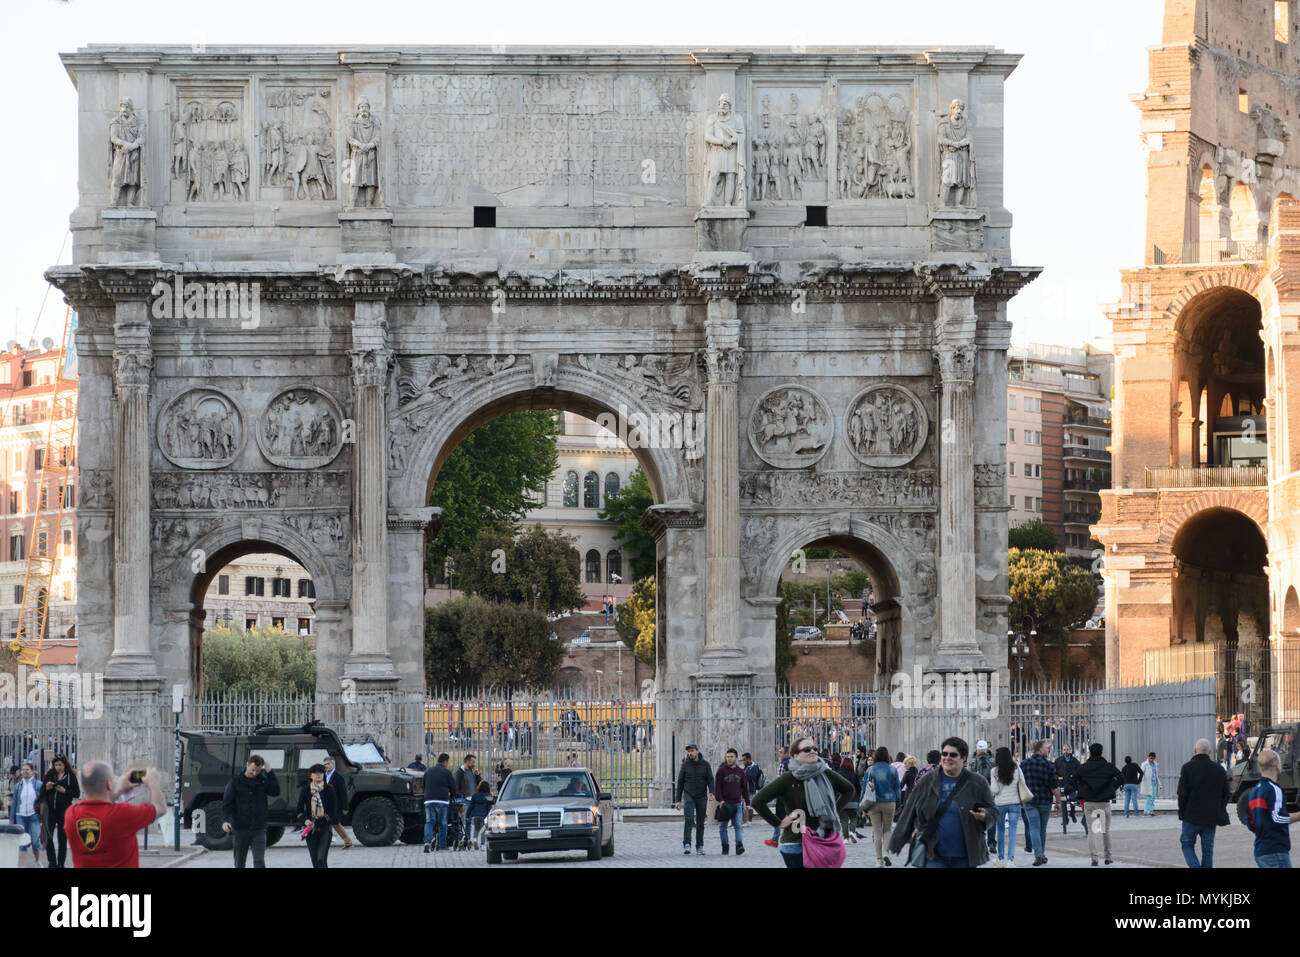 Rome, Italy - April 23, 2017: People walking near the Arch of Constantine, Italian Arco di Costantino a triumphal arch Stock Photo